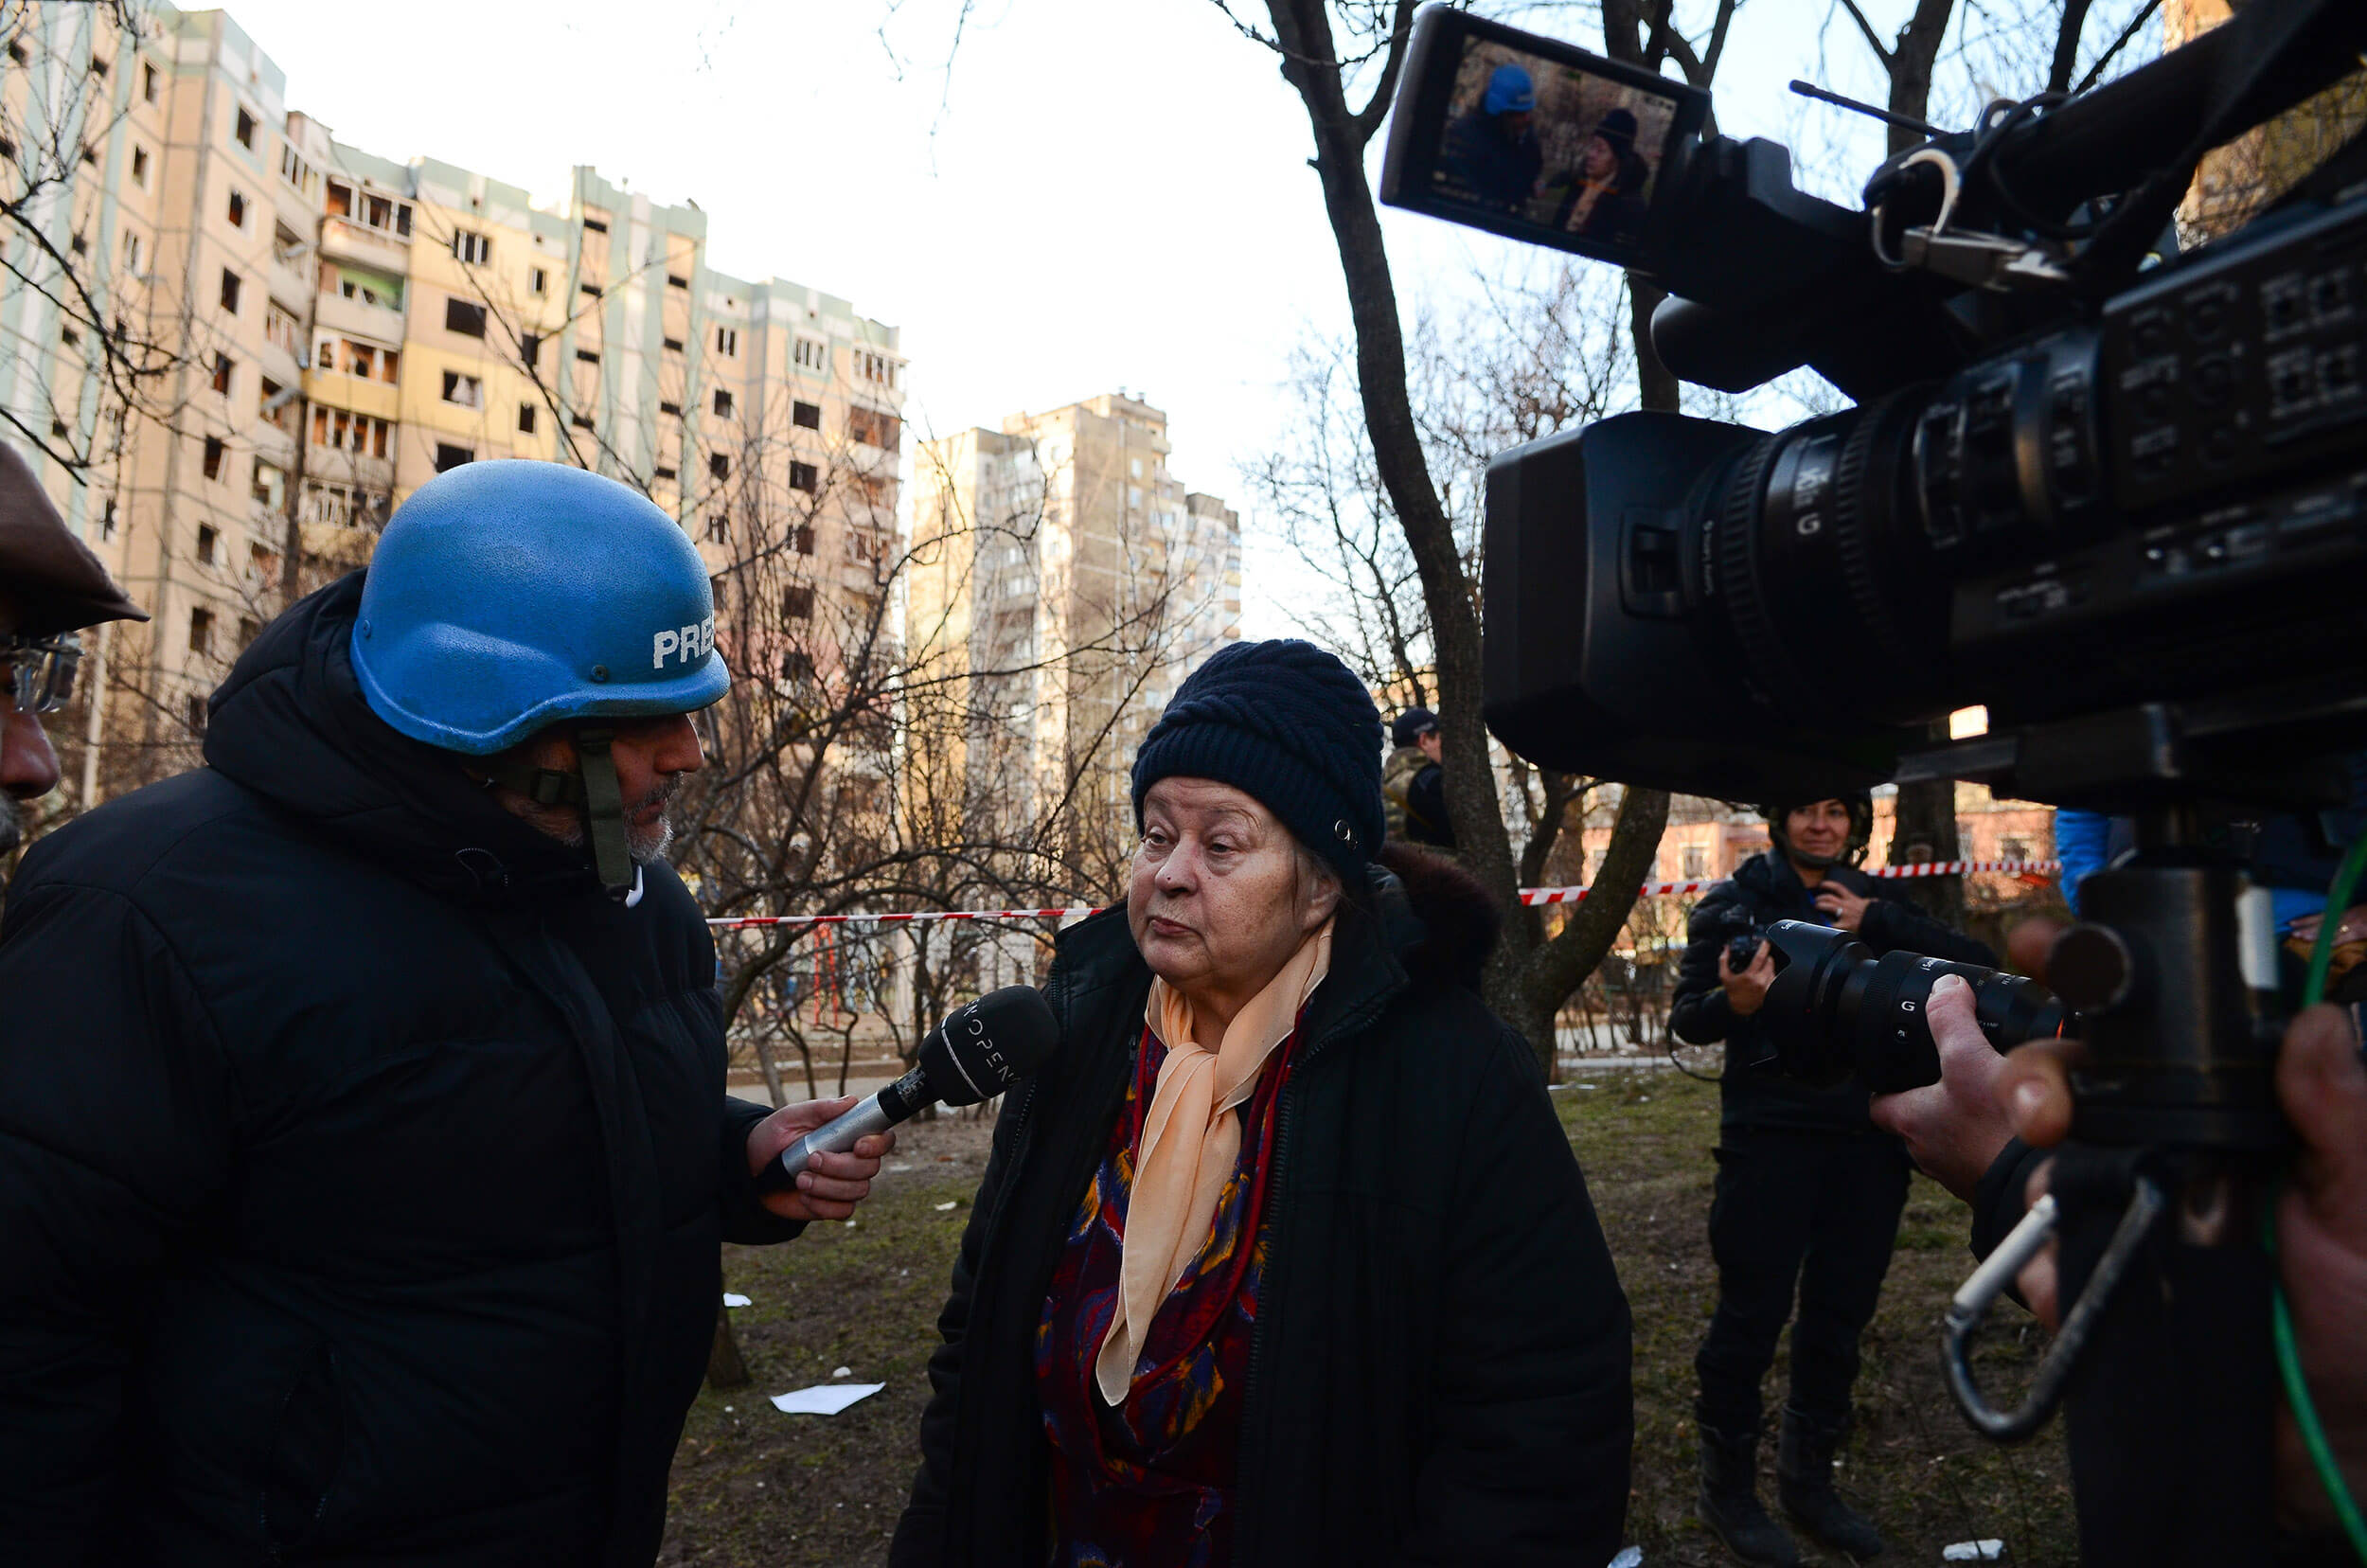 Open letter to media professionals who cover Russia’s invasion of Ukraine